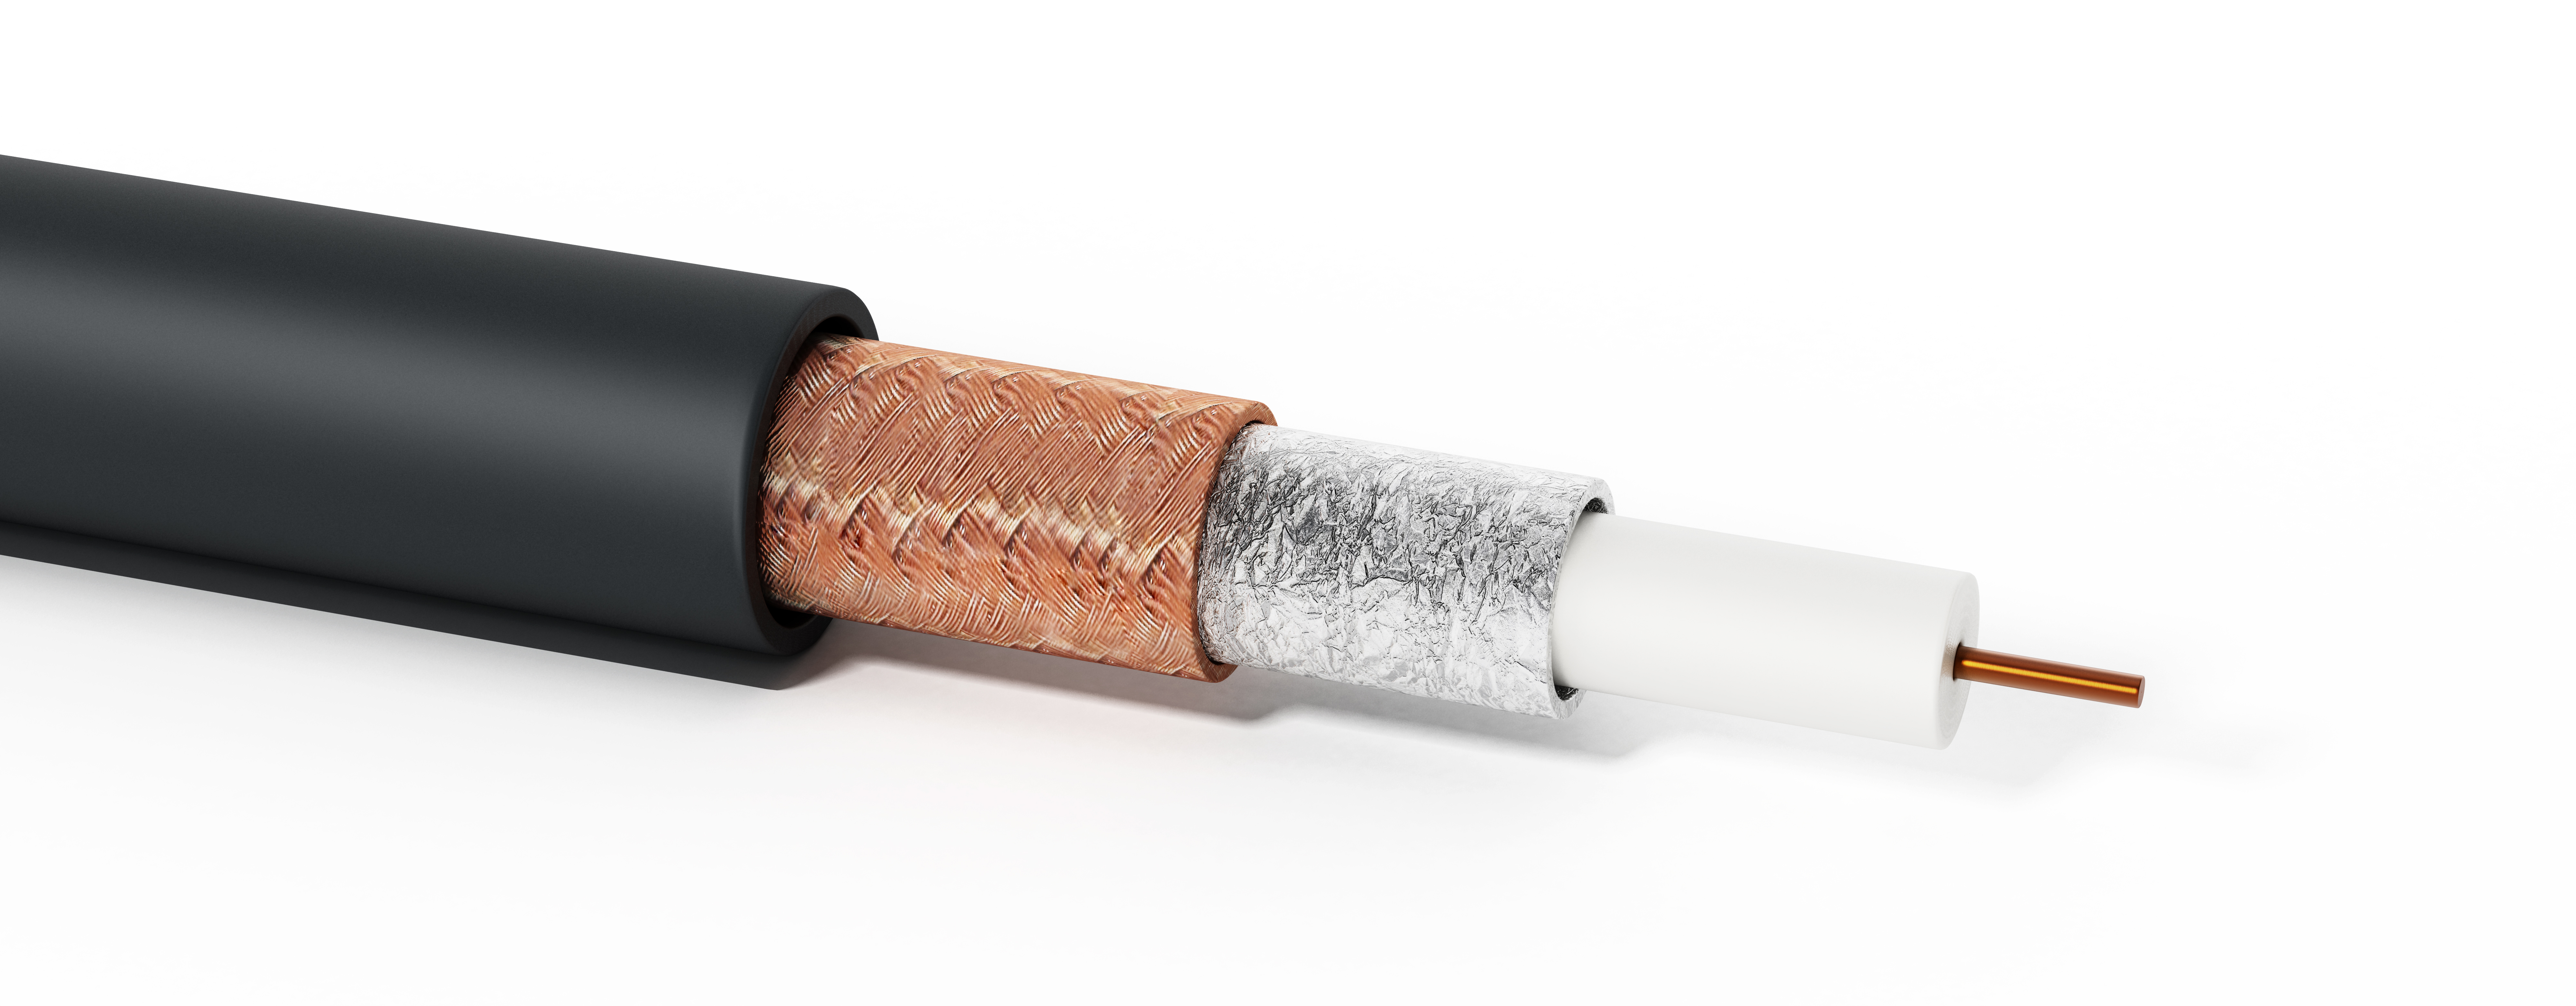 Coaxial cable showing detailed layers